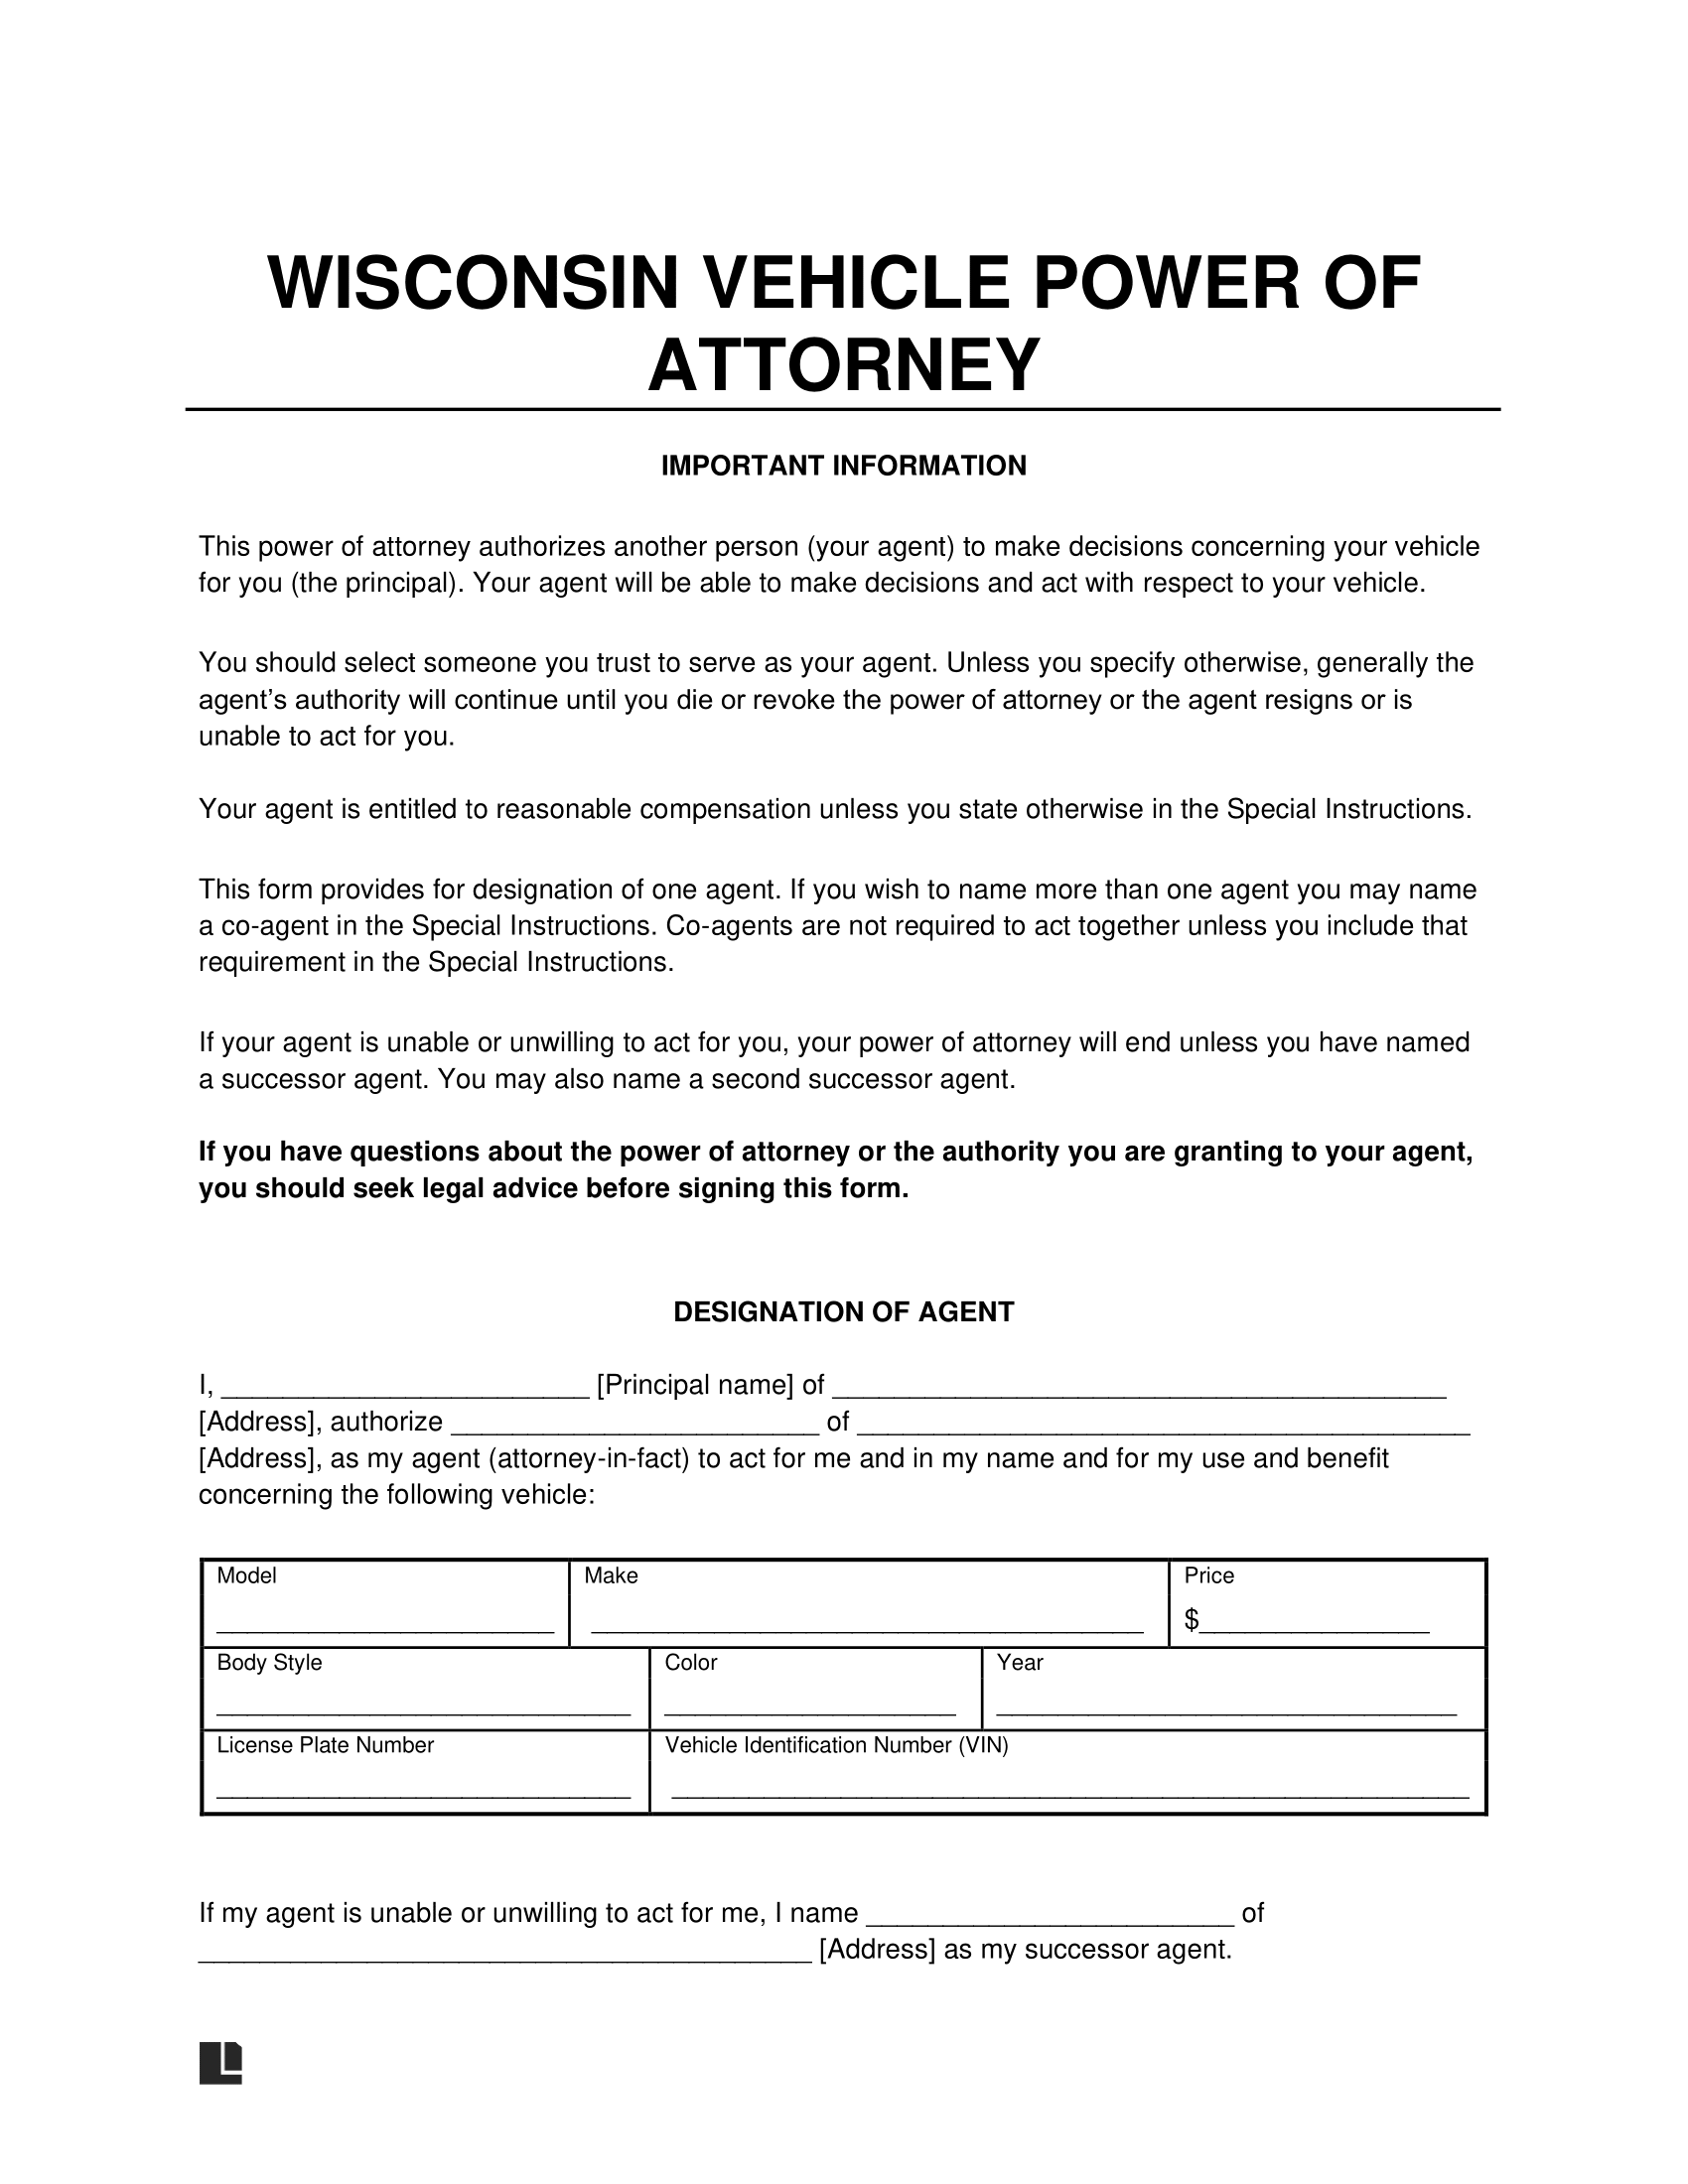 Wisconsin Motor Vehicle Power of Attorney Form